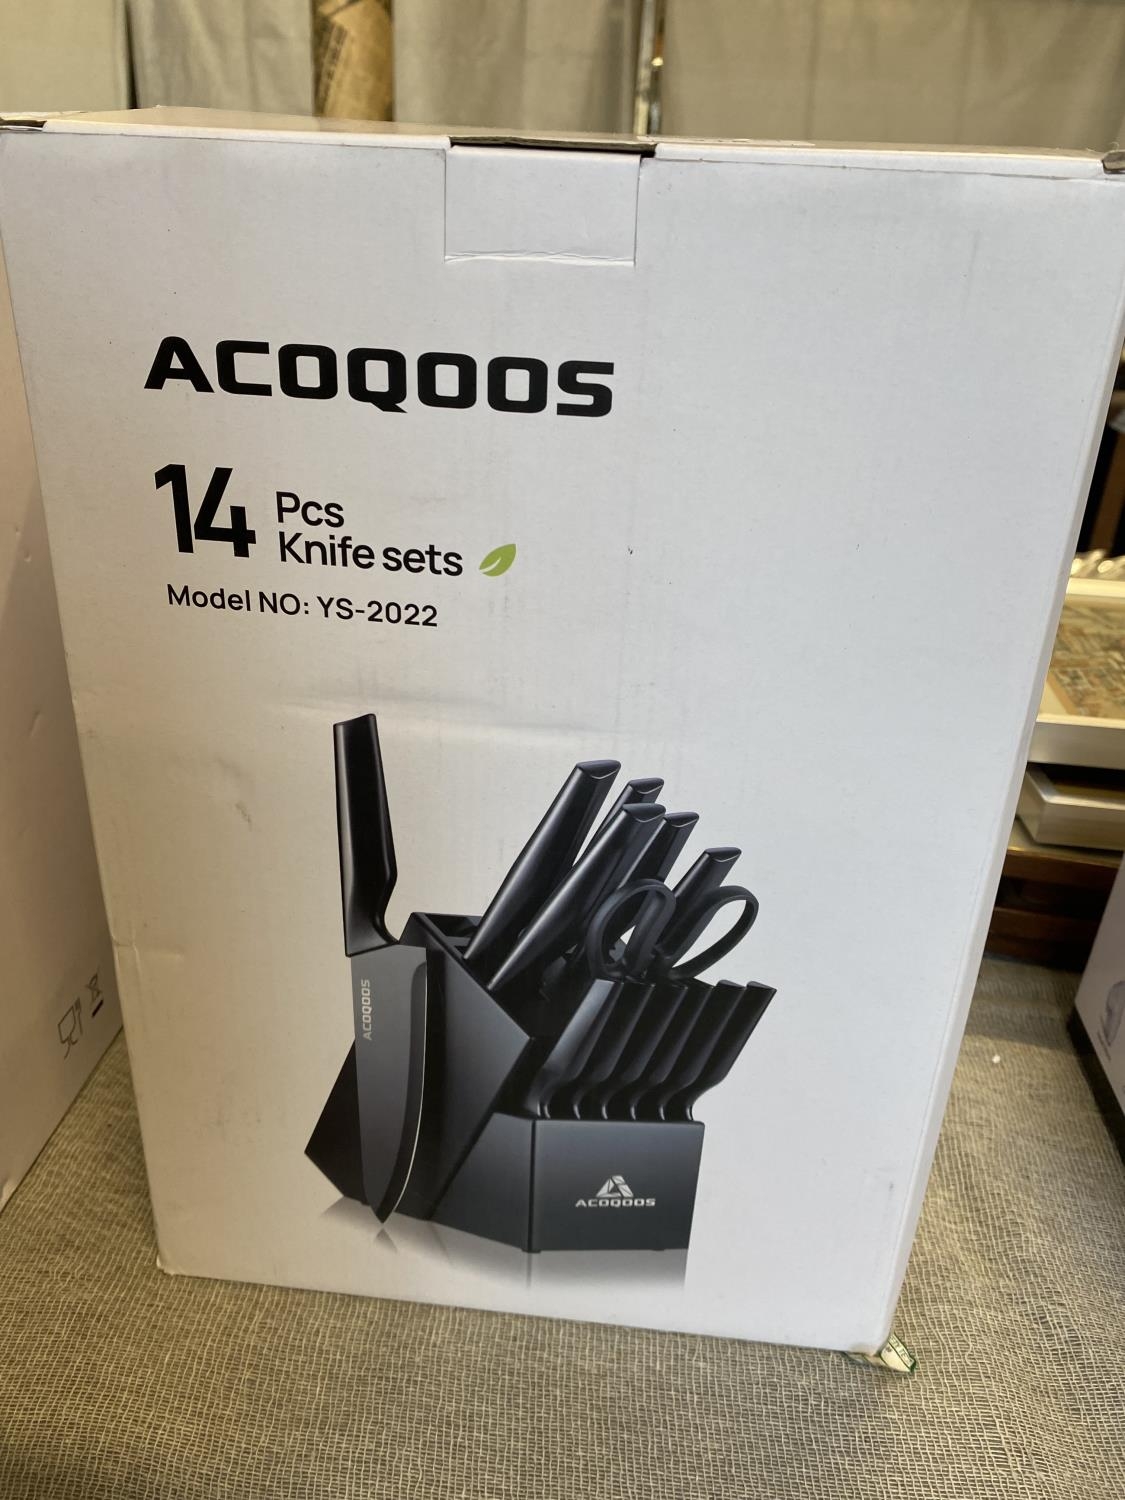 A Acoqoos 14 piece knife set (unchecked) over 18's only, UK Mainland shipping only